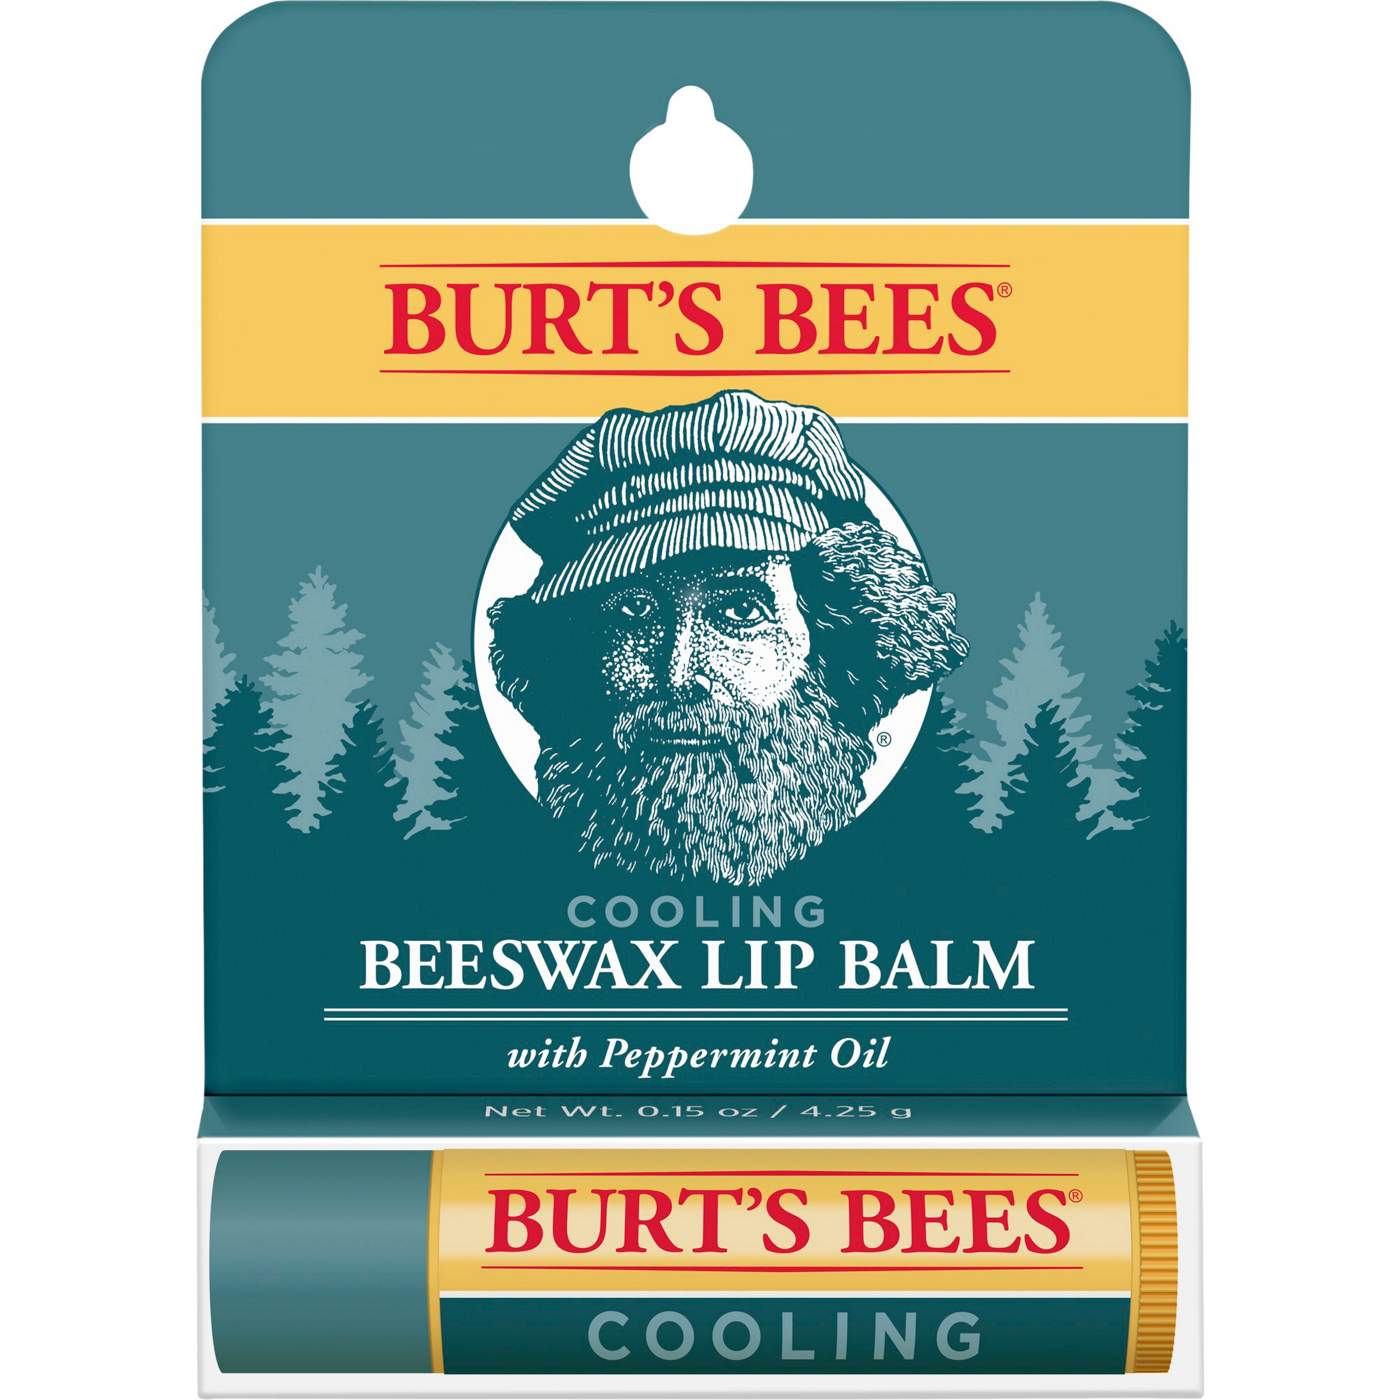 Burt's Bees Cooling Beeswax Lip Balm with Peppermint Oil; image 1 of 5